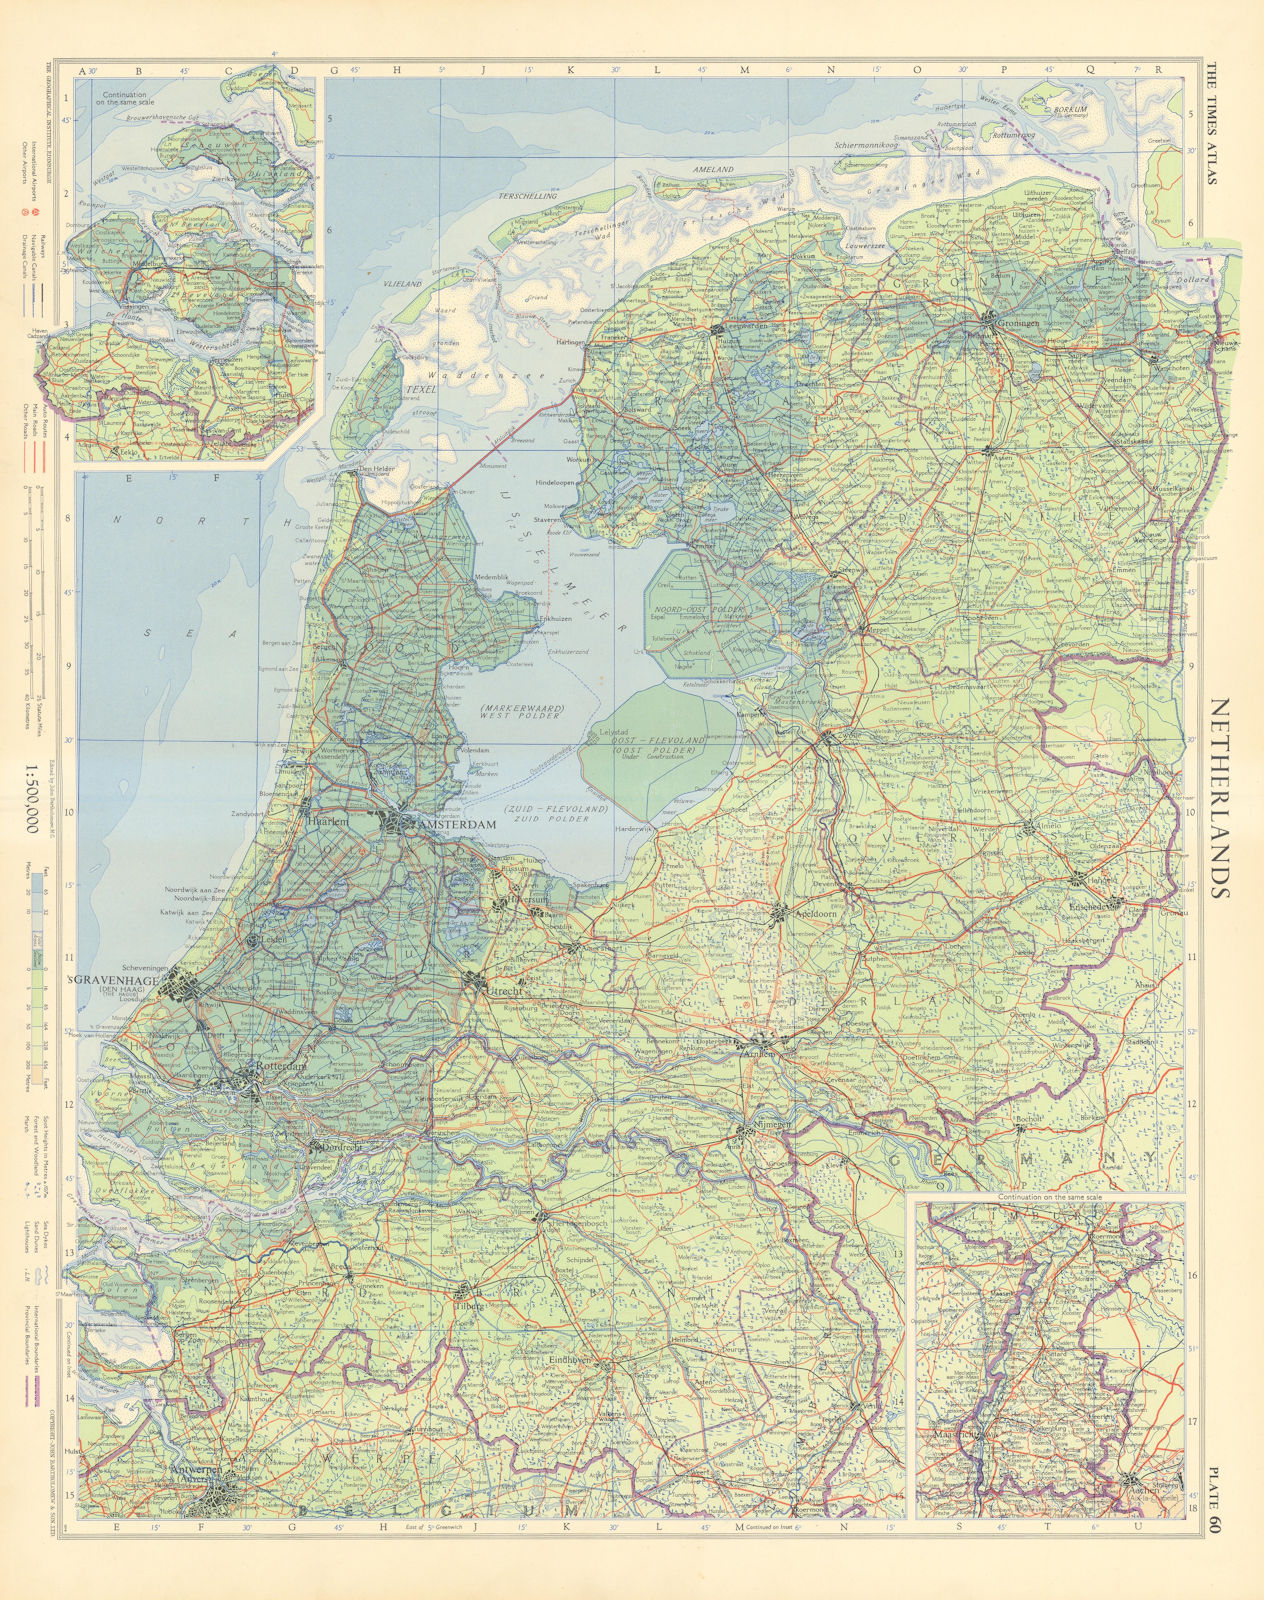 Associate Product Netherlands showing polders under construction & below sea level. TIMES 1955 map